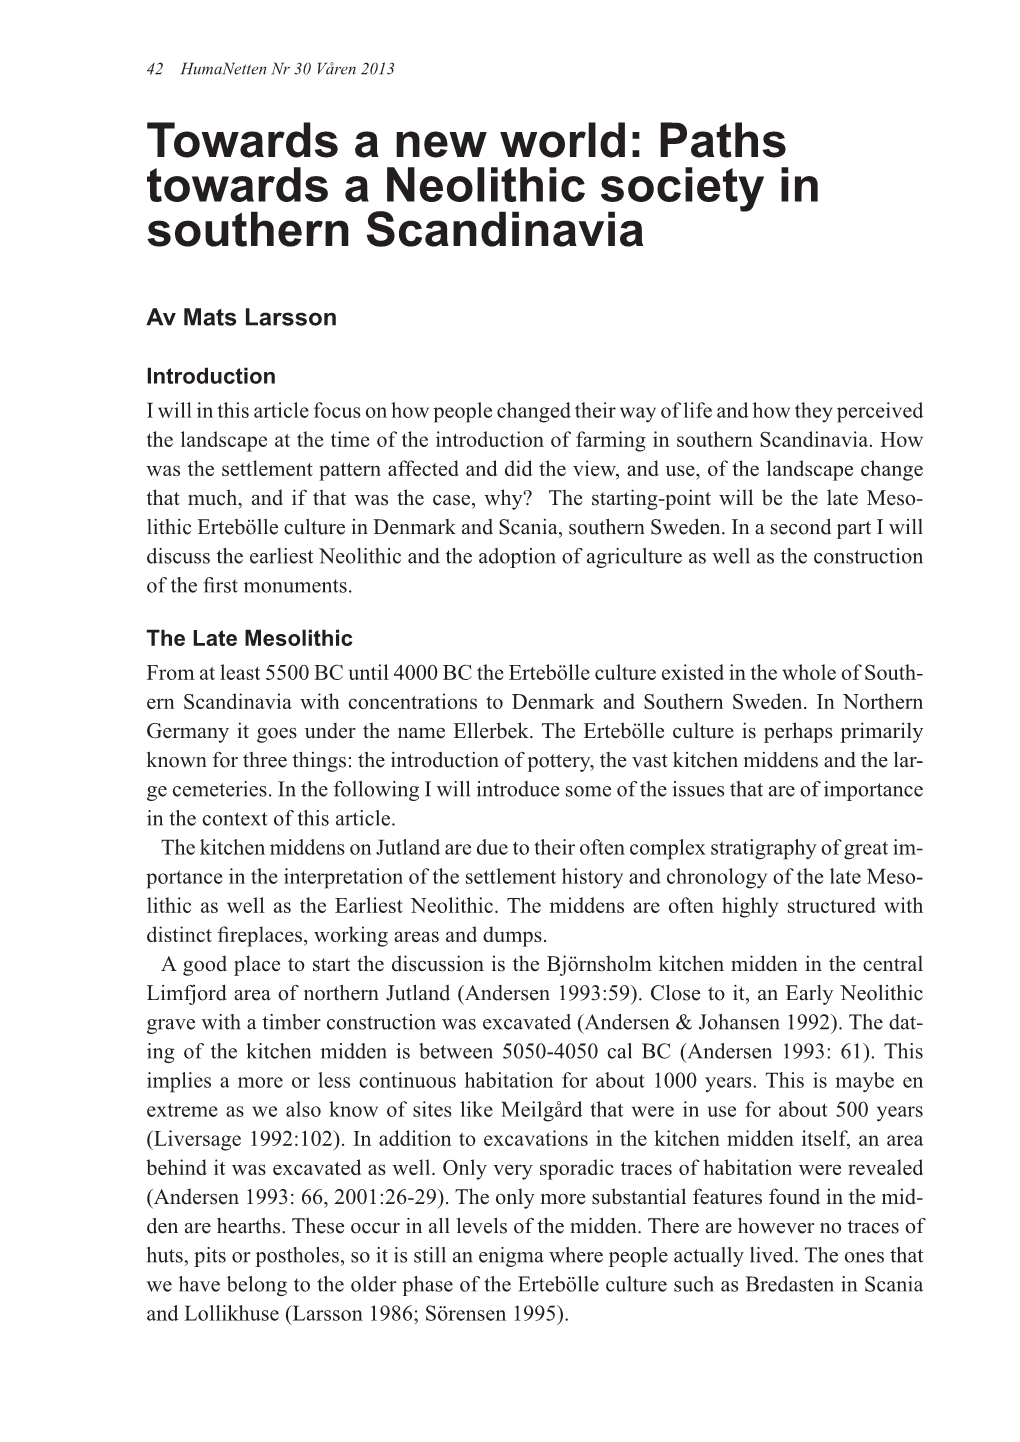 Paths Towards a Neolithic Society in Southern Scandinavia